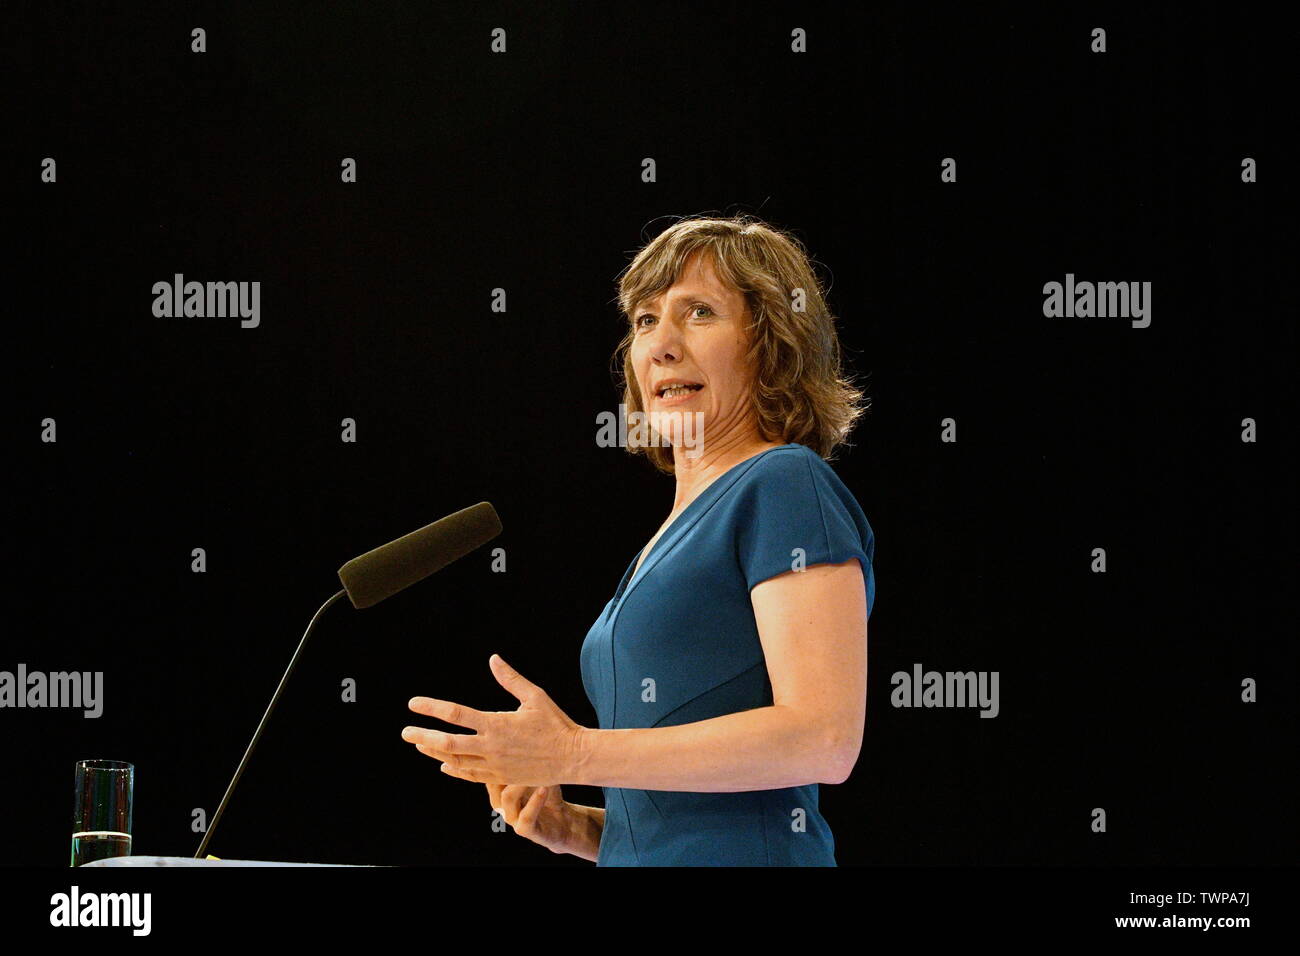 Vienna, Austria. 22st June, 2019. National Assembly of the Green Party Vienna. Election of the candidate list from the Green Party Vienna  for the National Council election on September 29, 2019. Picture shows the future Deputy Mayor of Vienna, Birgit Hebein.  Credit: Franz Perc/Alamy Live News Stock Photo